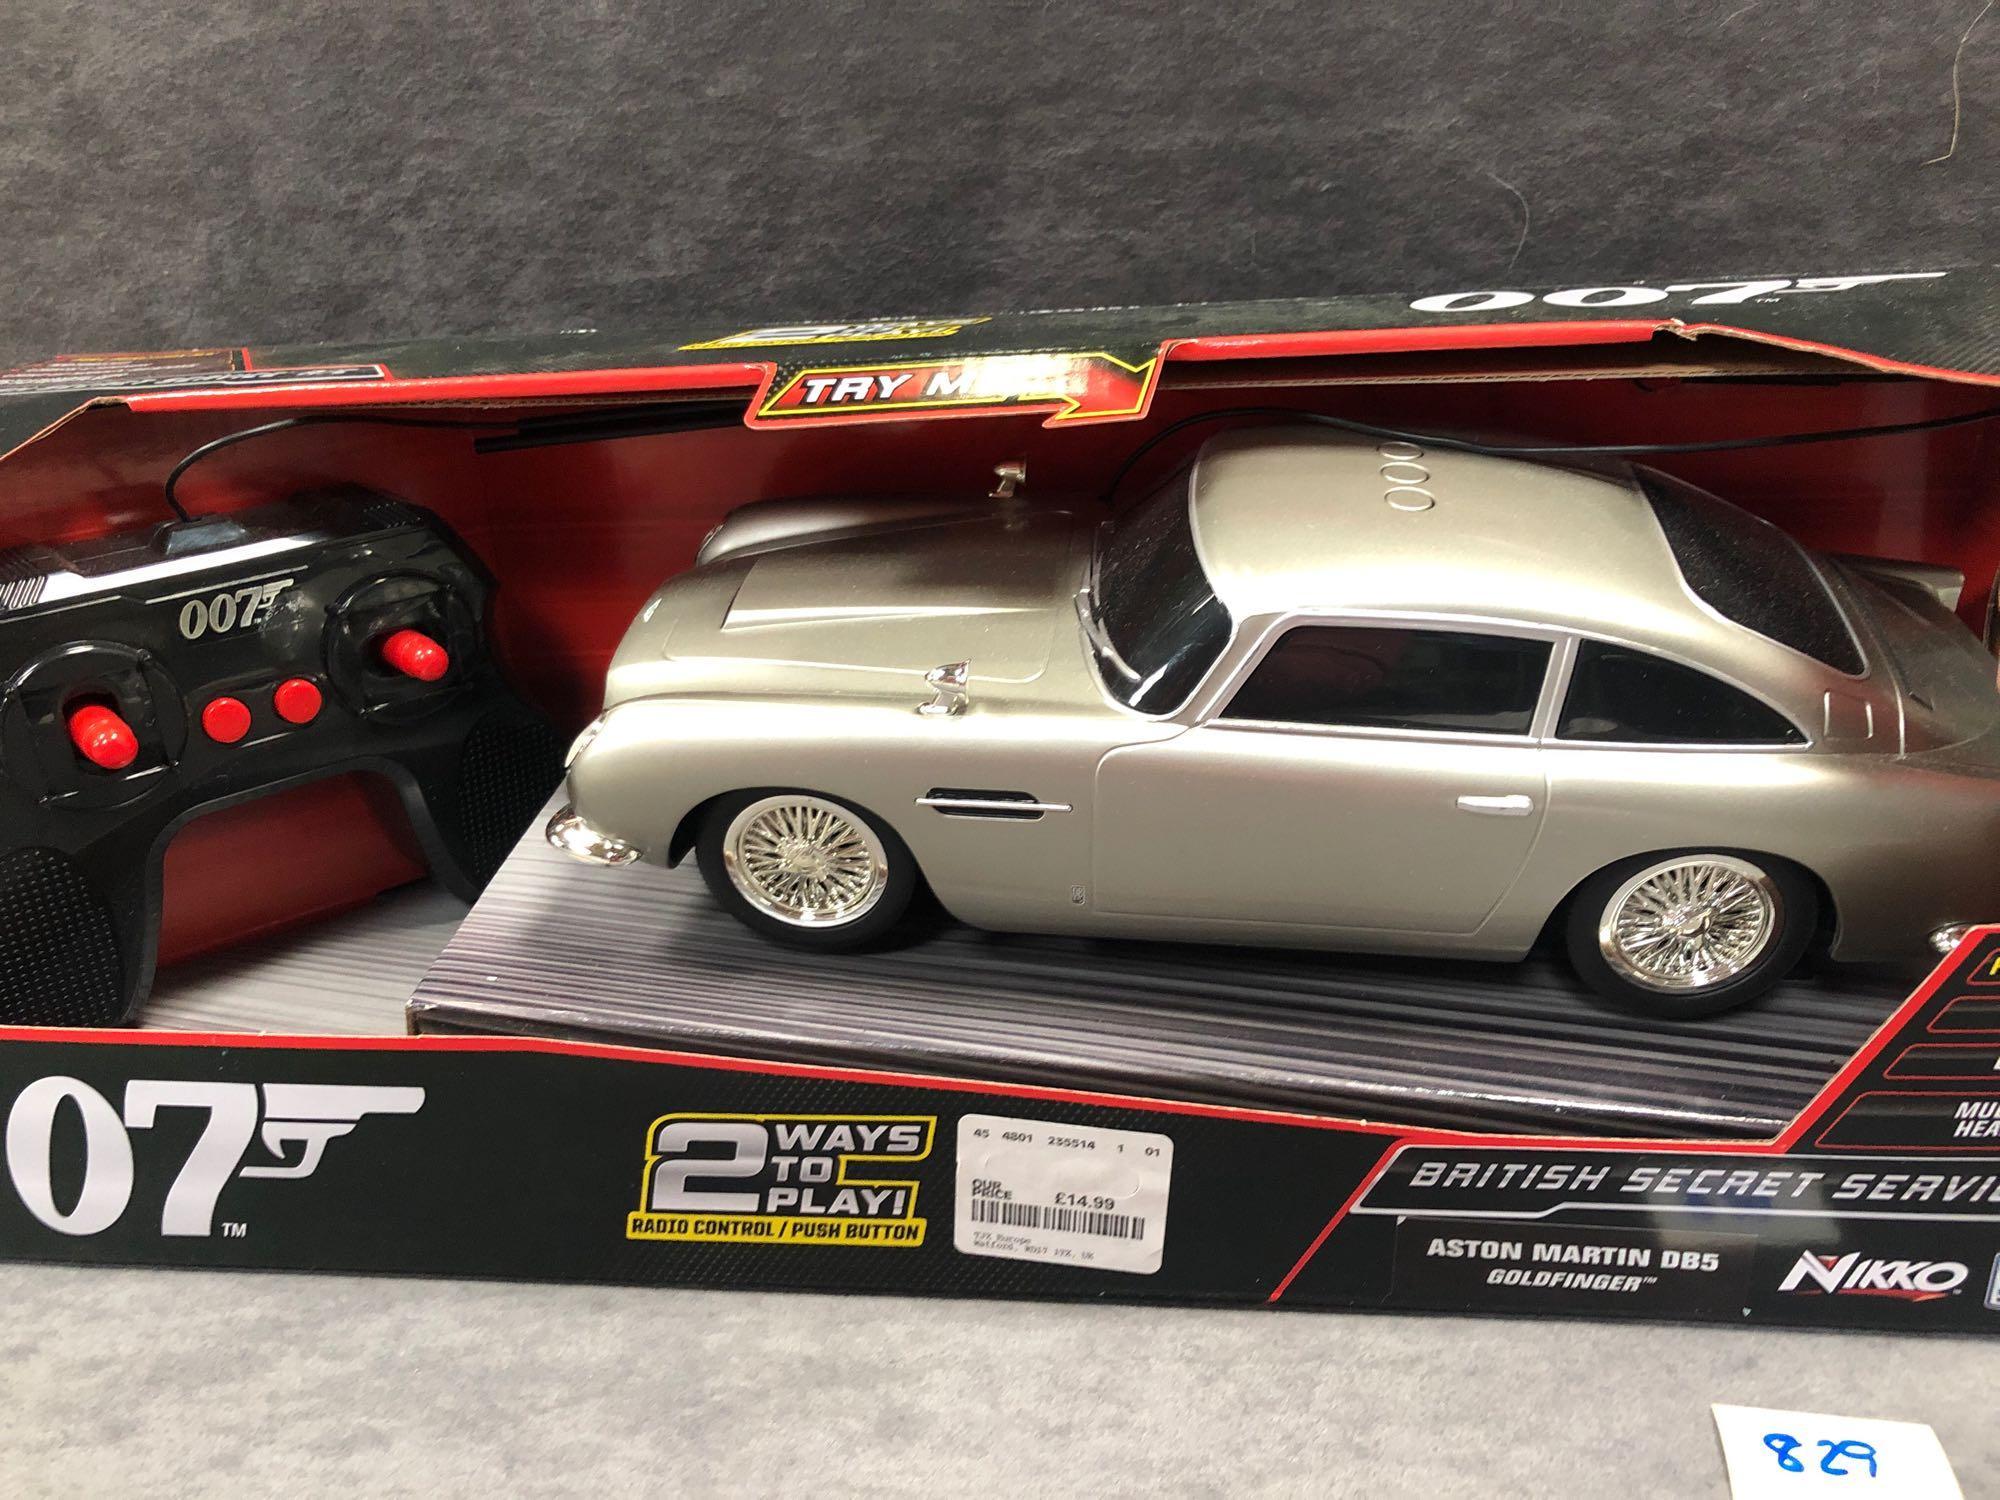 Nikko Radio Control Or Pushbutton Aston Martin DB5 From Goldfinger In Box - Image 2 of 2